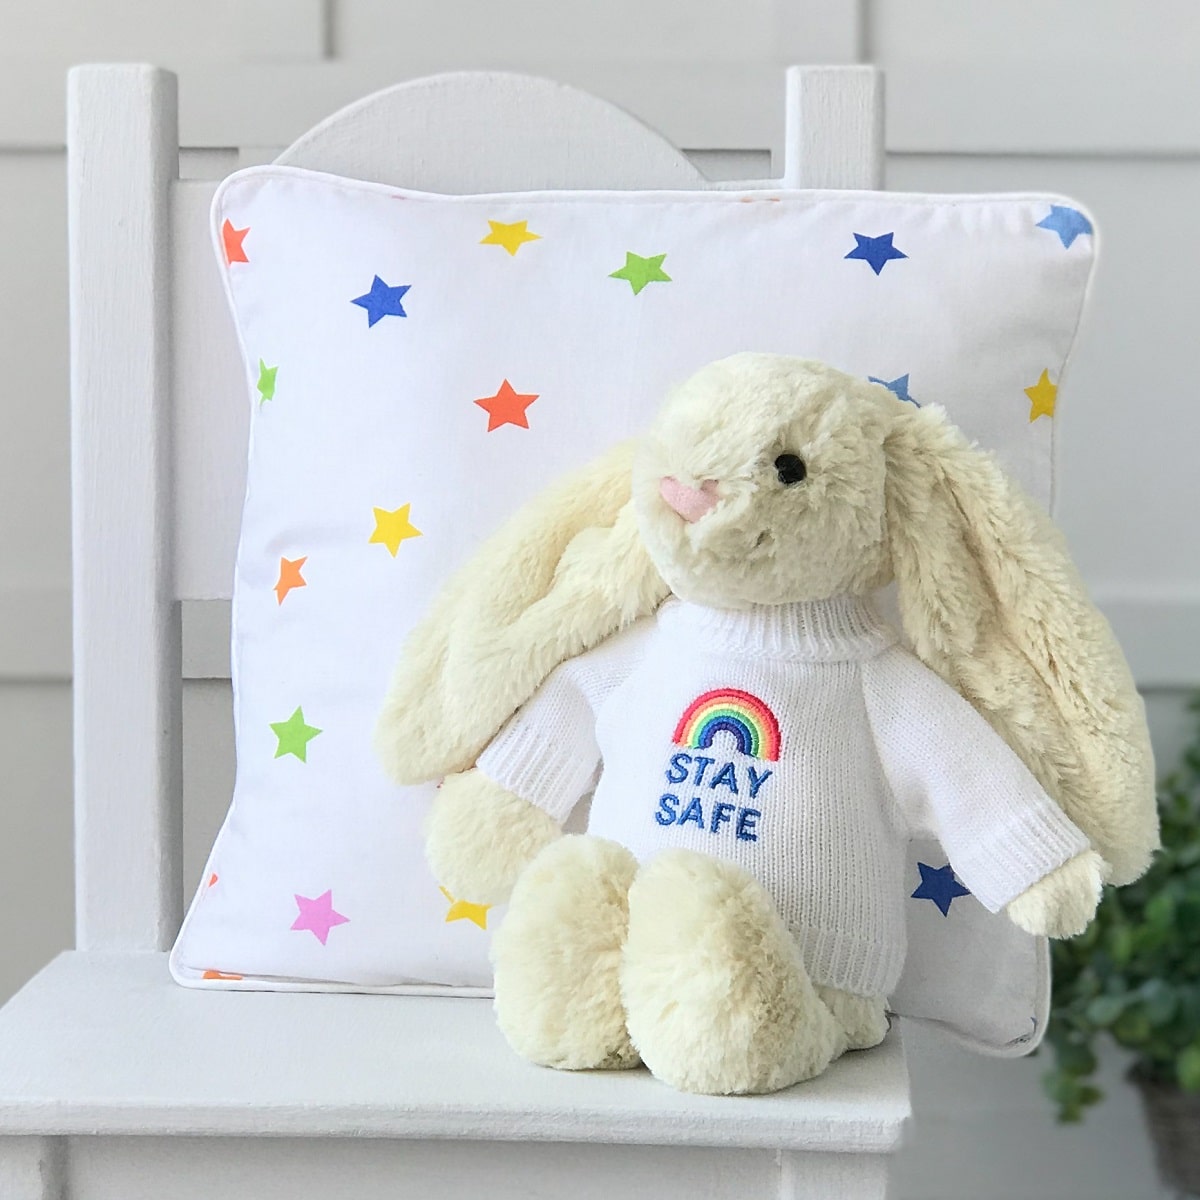 Jellycat medium bashful bunny soft toy with ‘Stay Safe’ jumper in Buttermilk